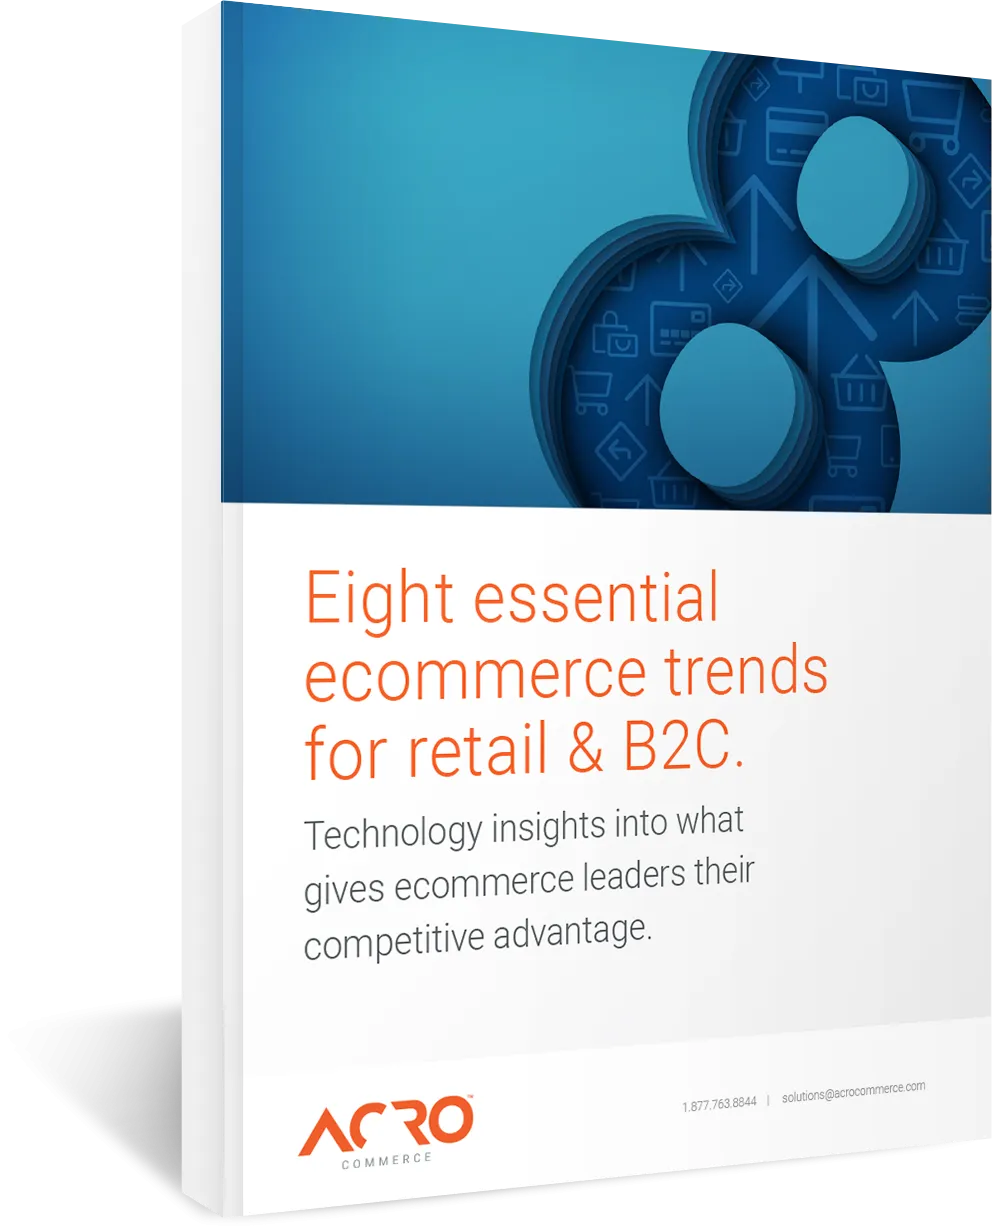 Eight Essential Ecommerce Trends for Retail & B2C